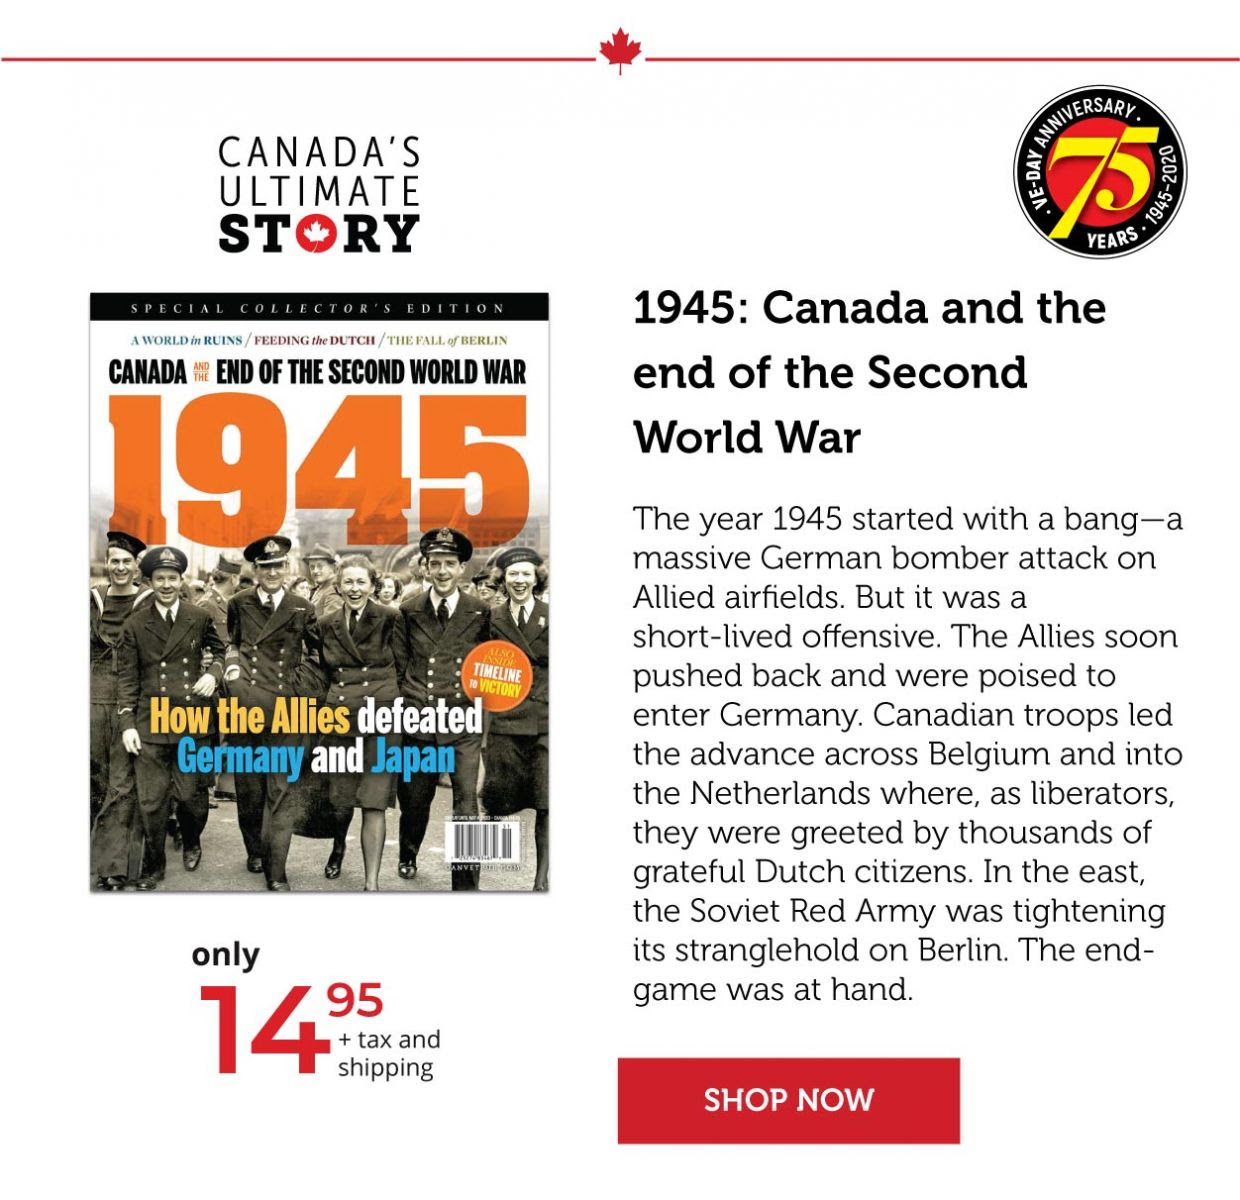 1945 – Canada and the end of the Second World War